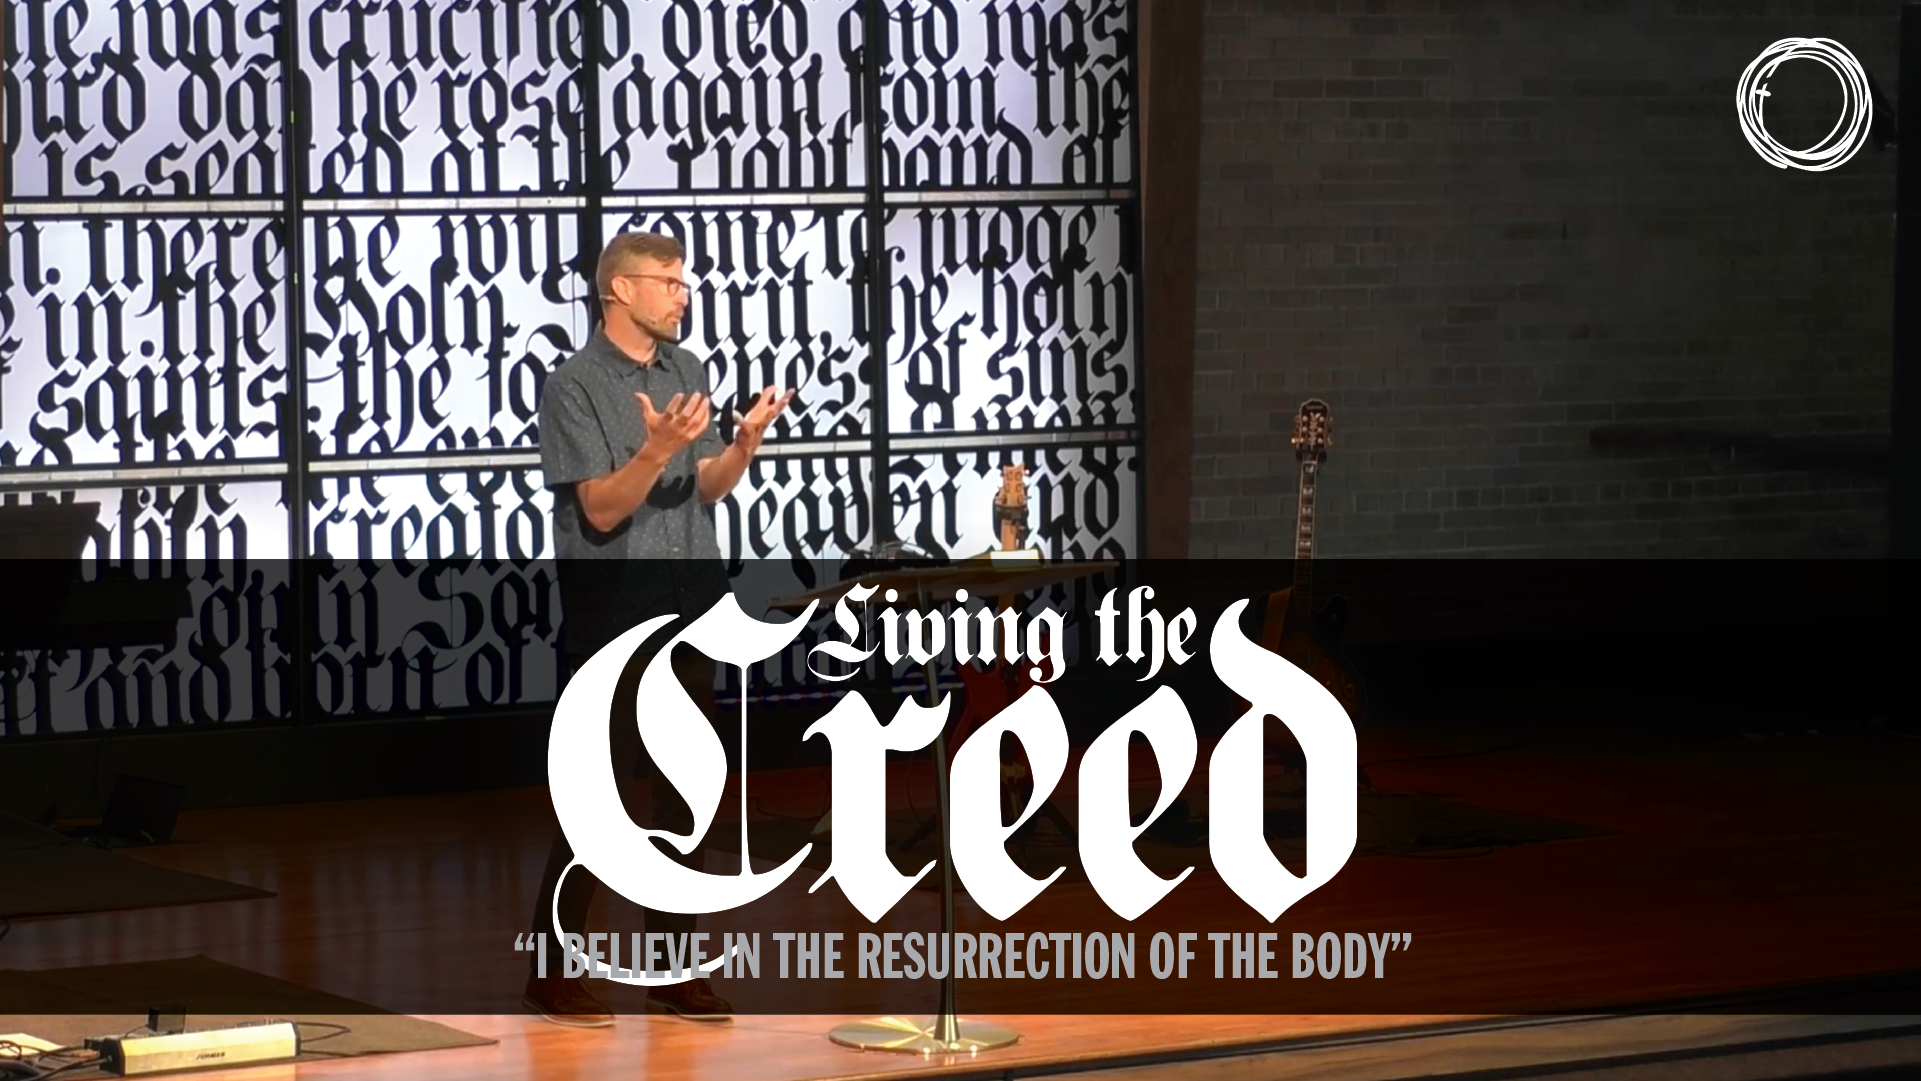 "I believe in the resurrection of the body"